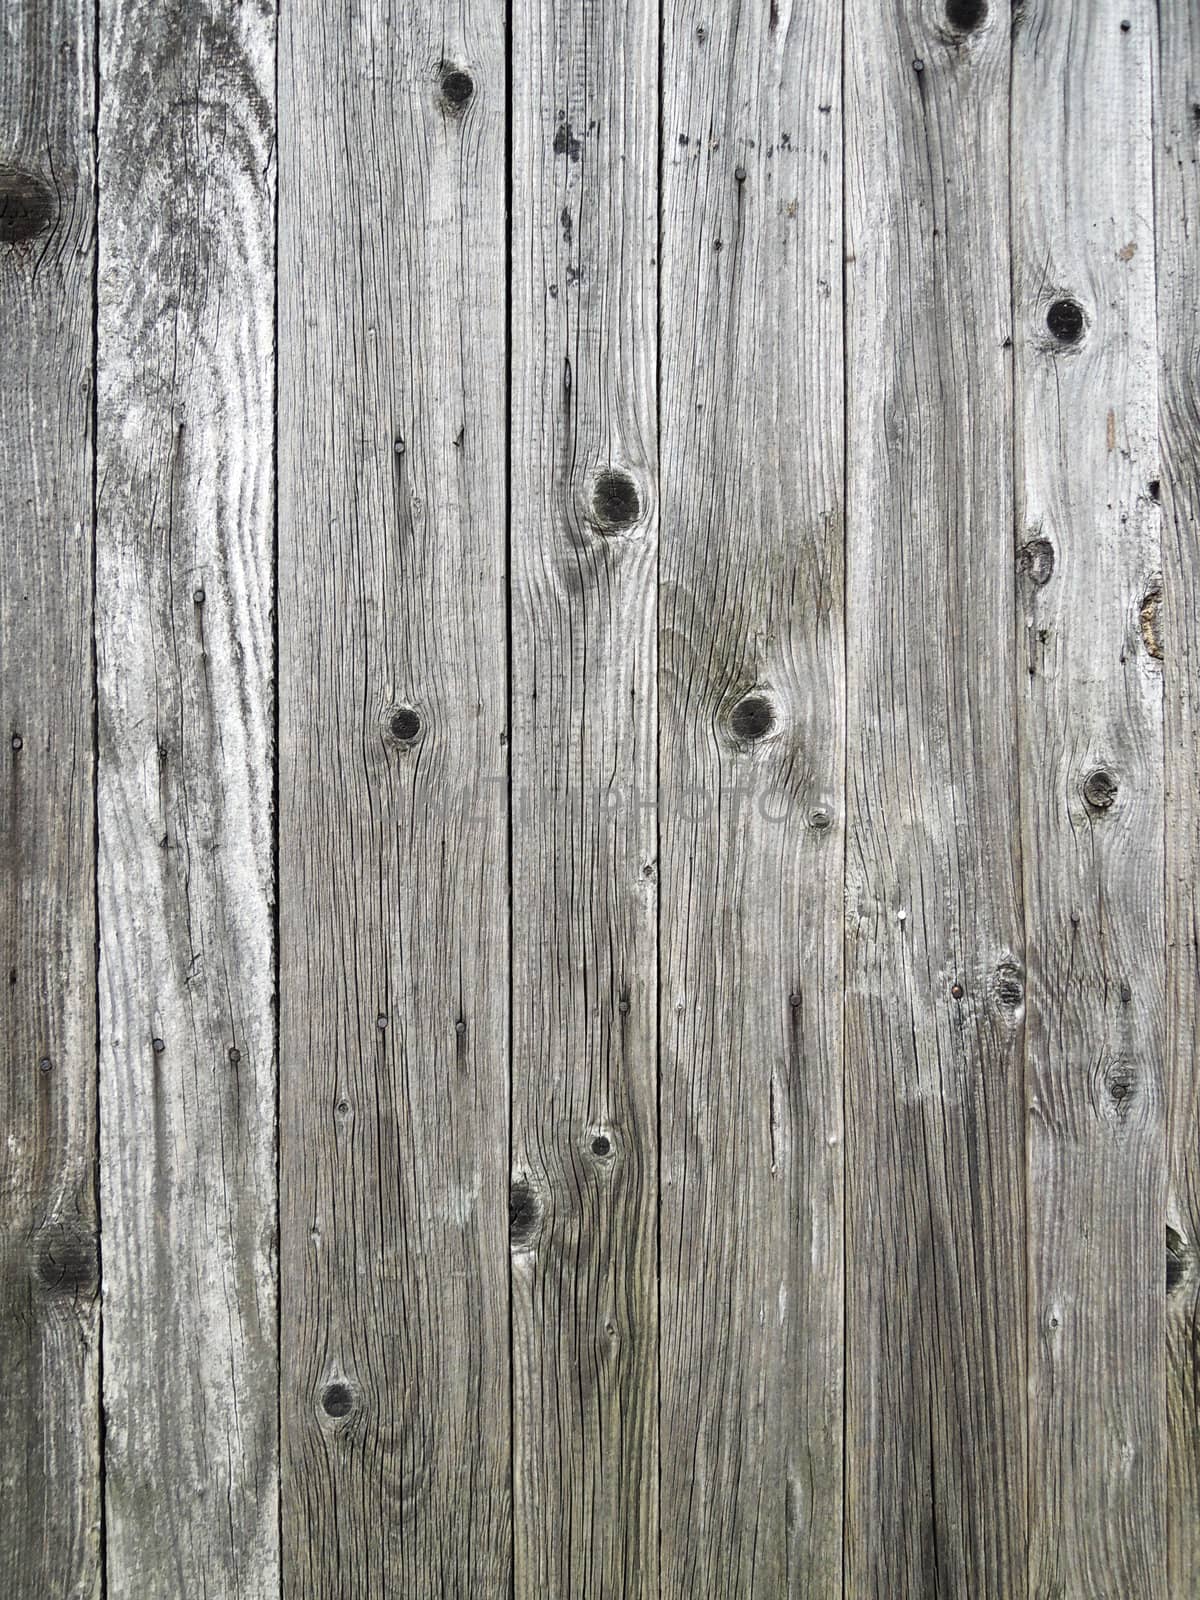 Gray wooden wall background by MalyDesigner